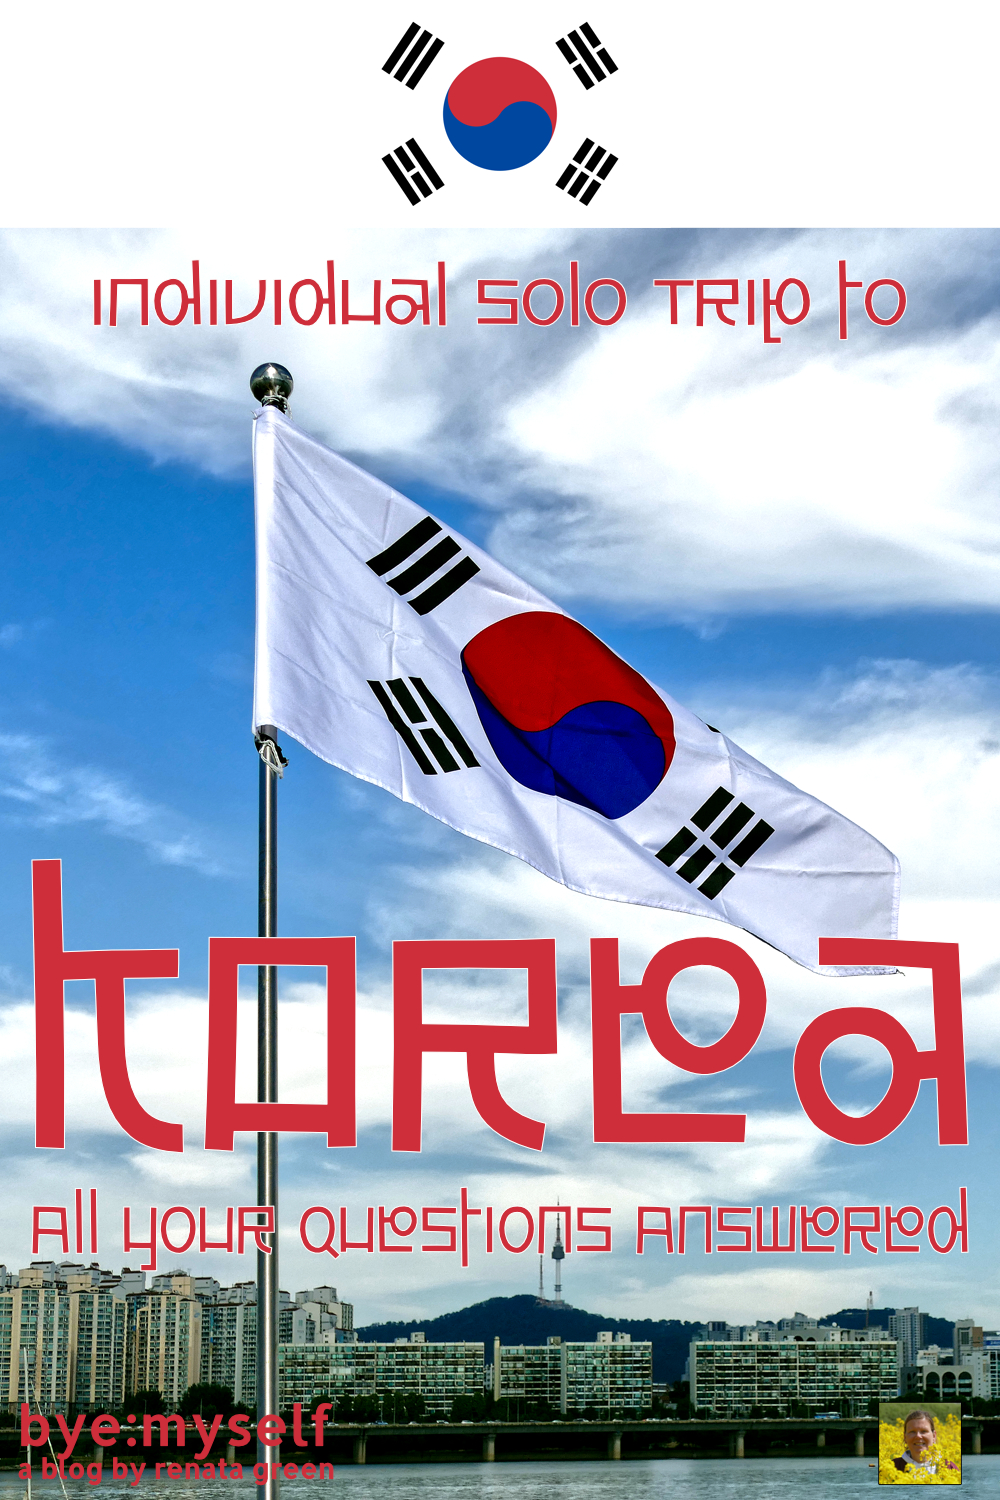 Travelling around Korea can be a bit overwhelming, especially for individual solo travellers. In this post, I put together info and tips that will make your trip easier and fun from day one. #korea #southkorea #asia #travelhacks #traveltips #travelinfo #individualtravel #solotravel #byemyself